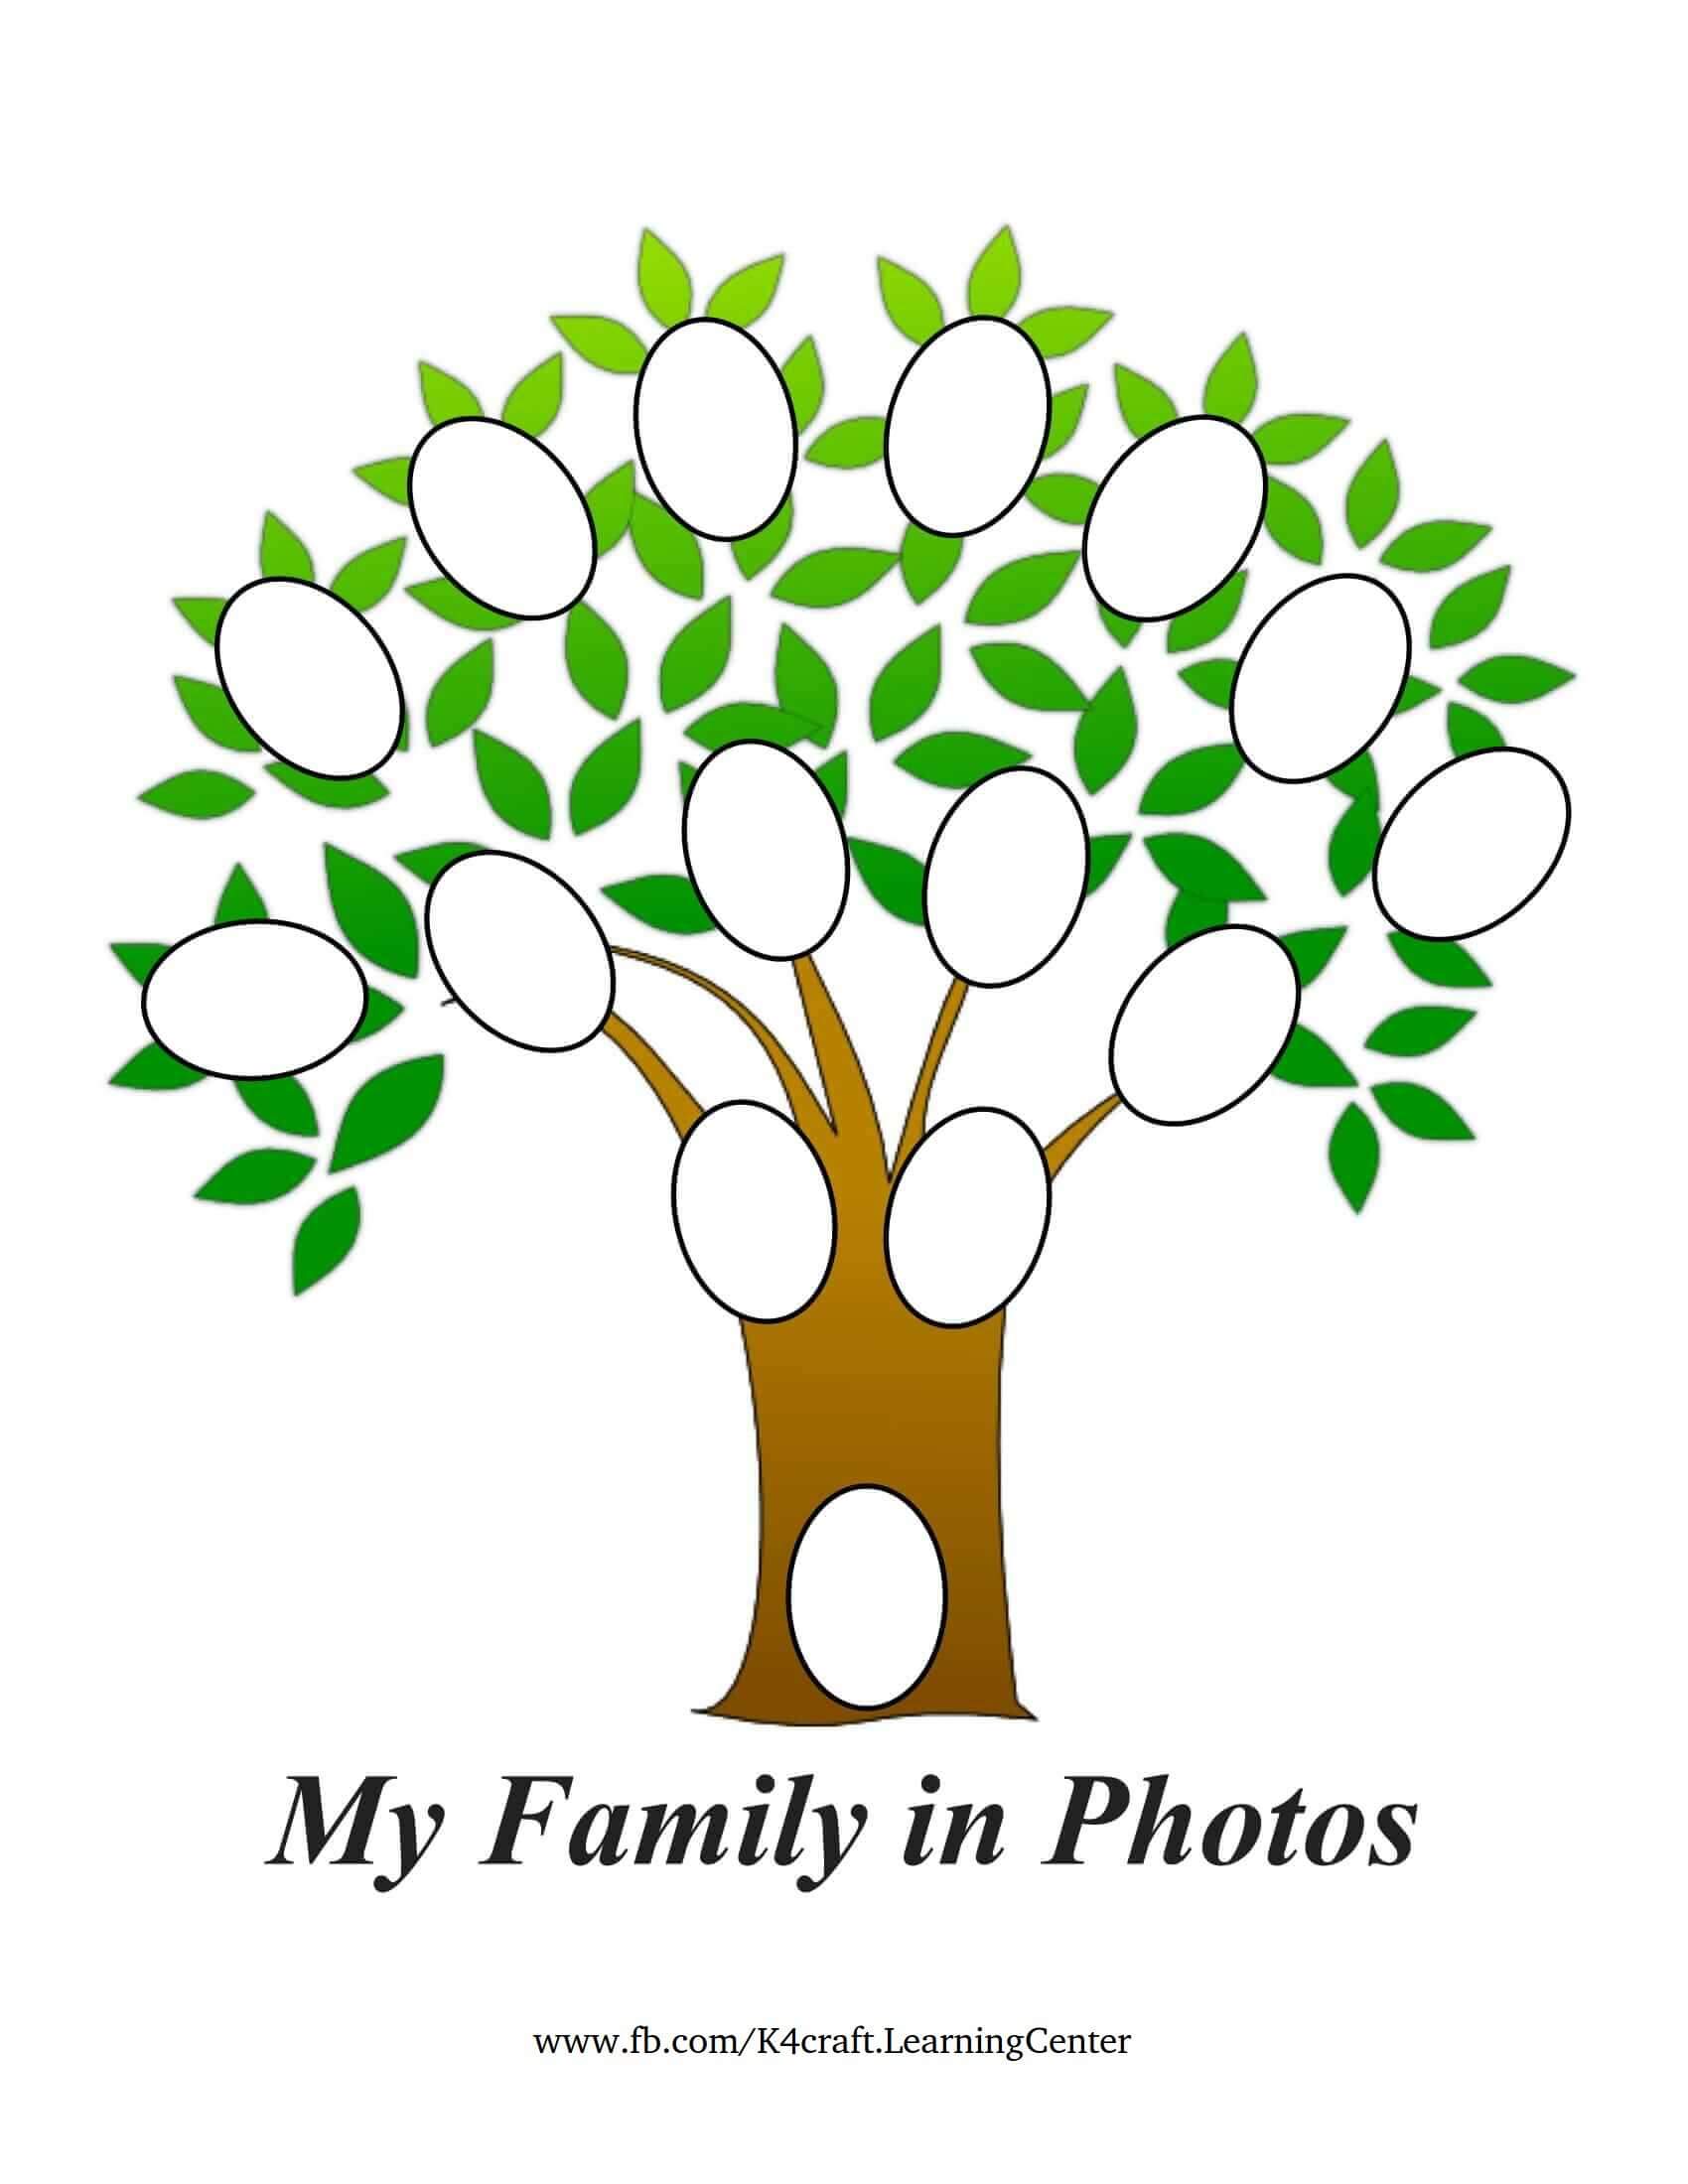 My Family Tree Template With Photos - Kids Family Tree Graphic Organizers 